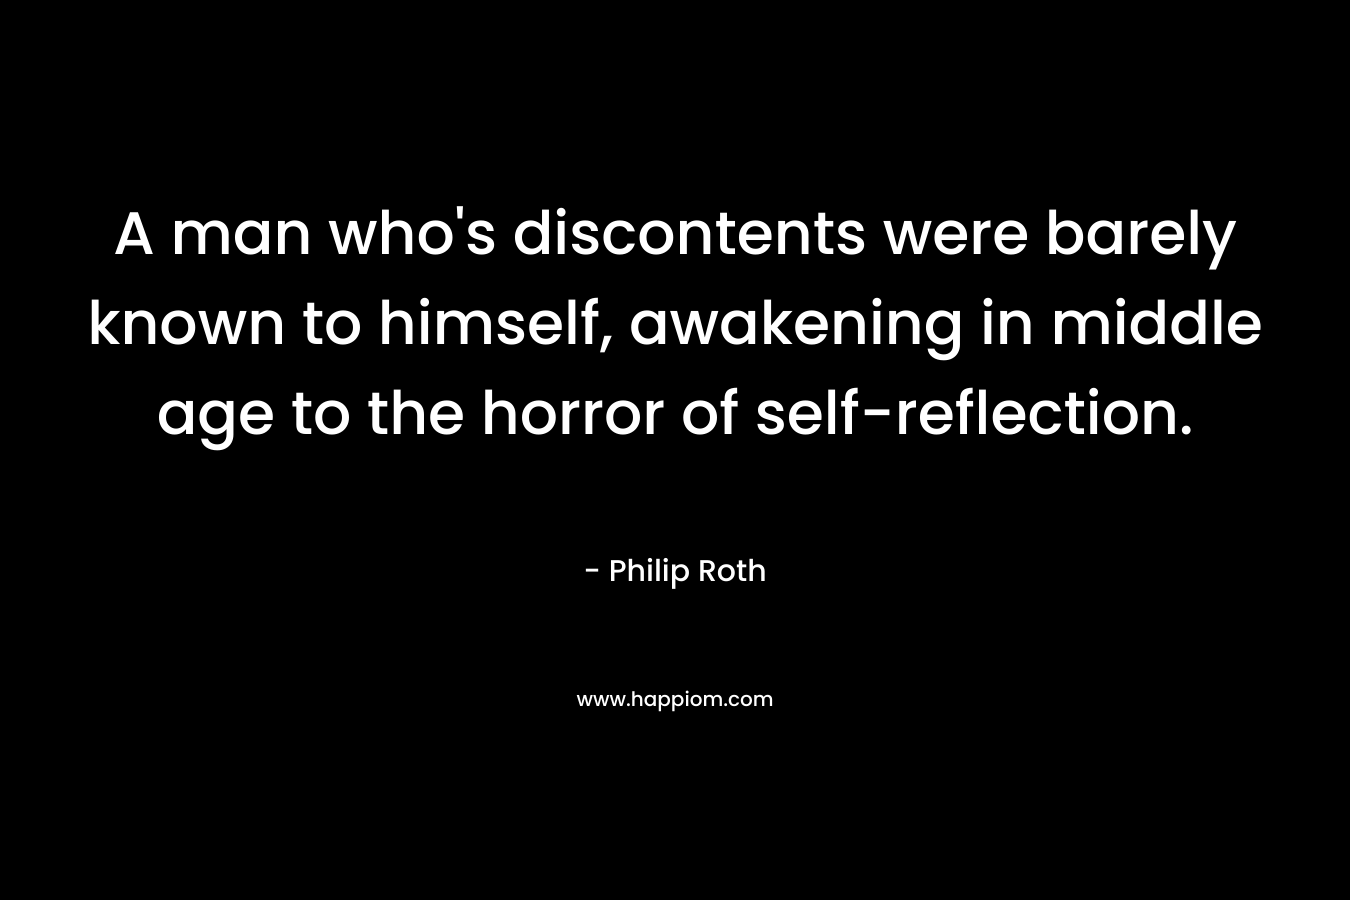 A man who's discontents were barely known to himself, awakening in middle age to the horror of self-reflection.